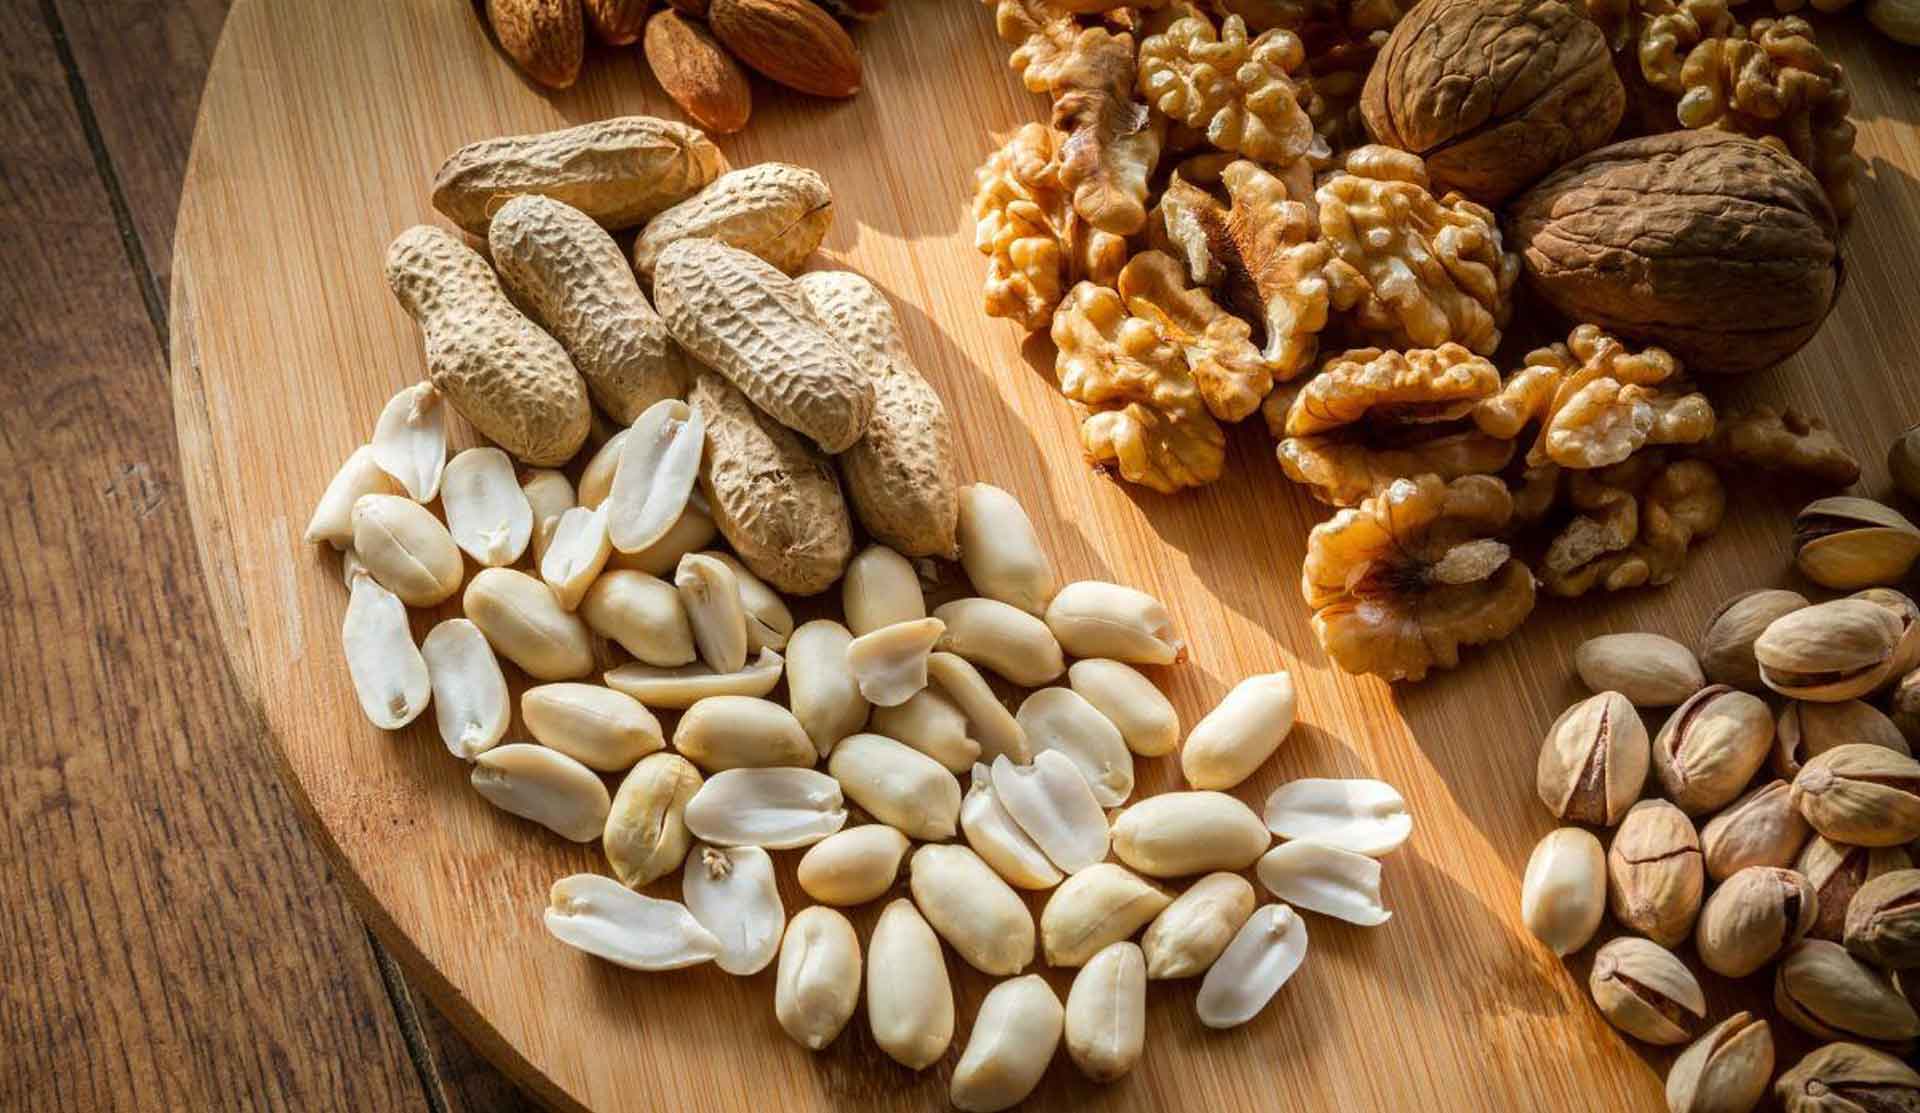 Going Nuts for Good Health